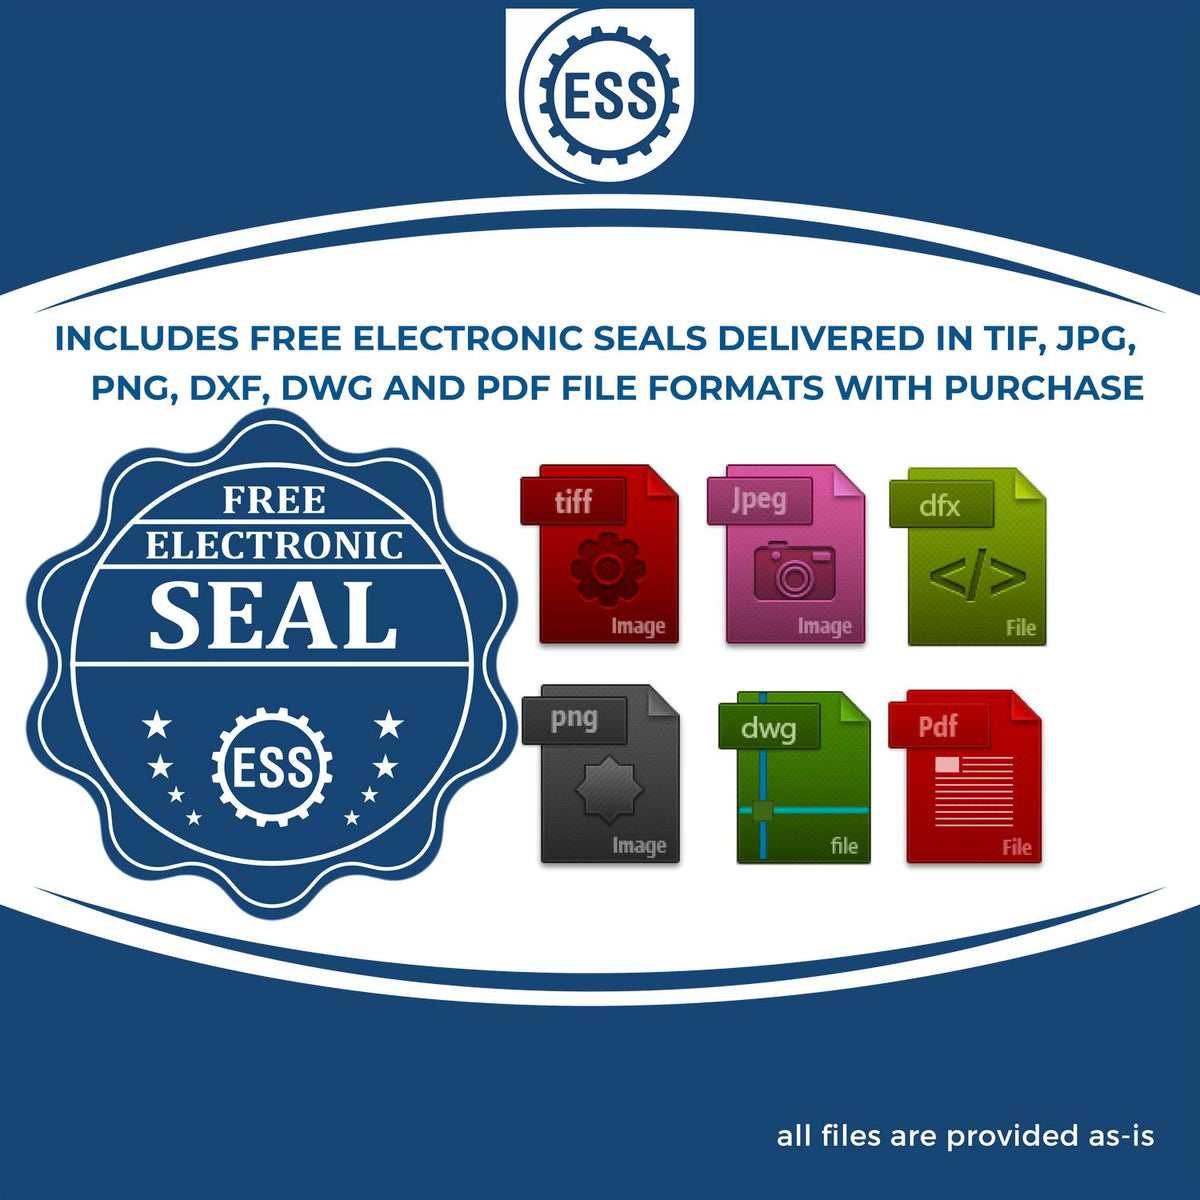 An infographic for the free electronic seal for the Premium MaxLight Pre-Inked Massachusetts Geology Stamp illustrating the different file type icons such as DXF, DWG, TIF, JPG and PNG.